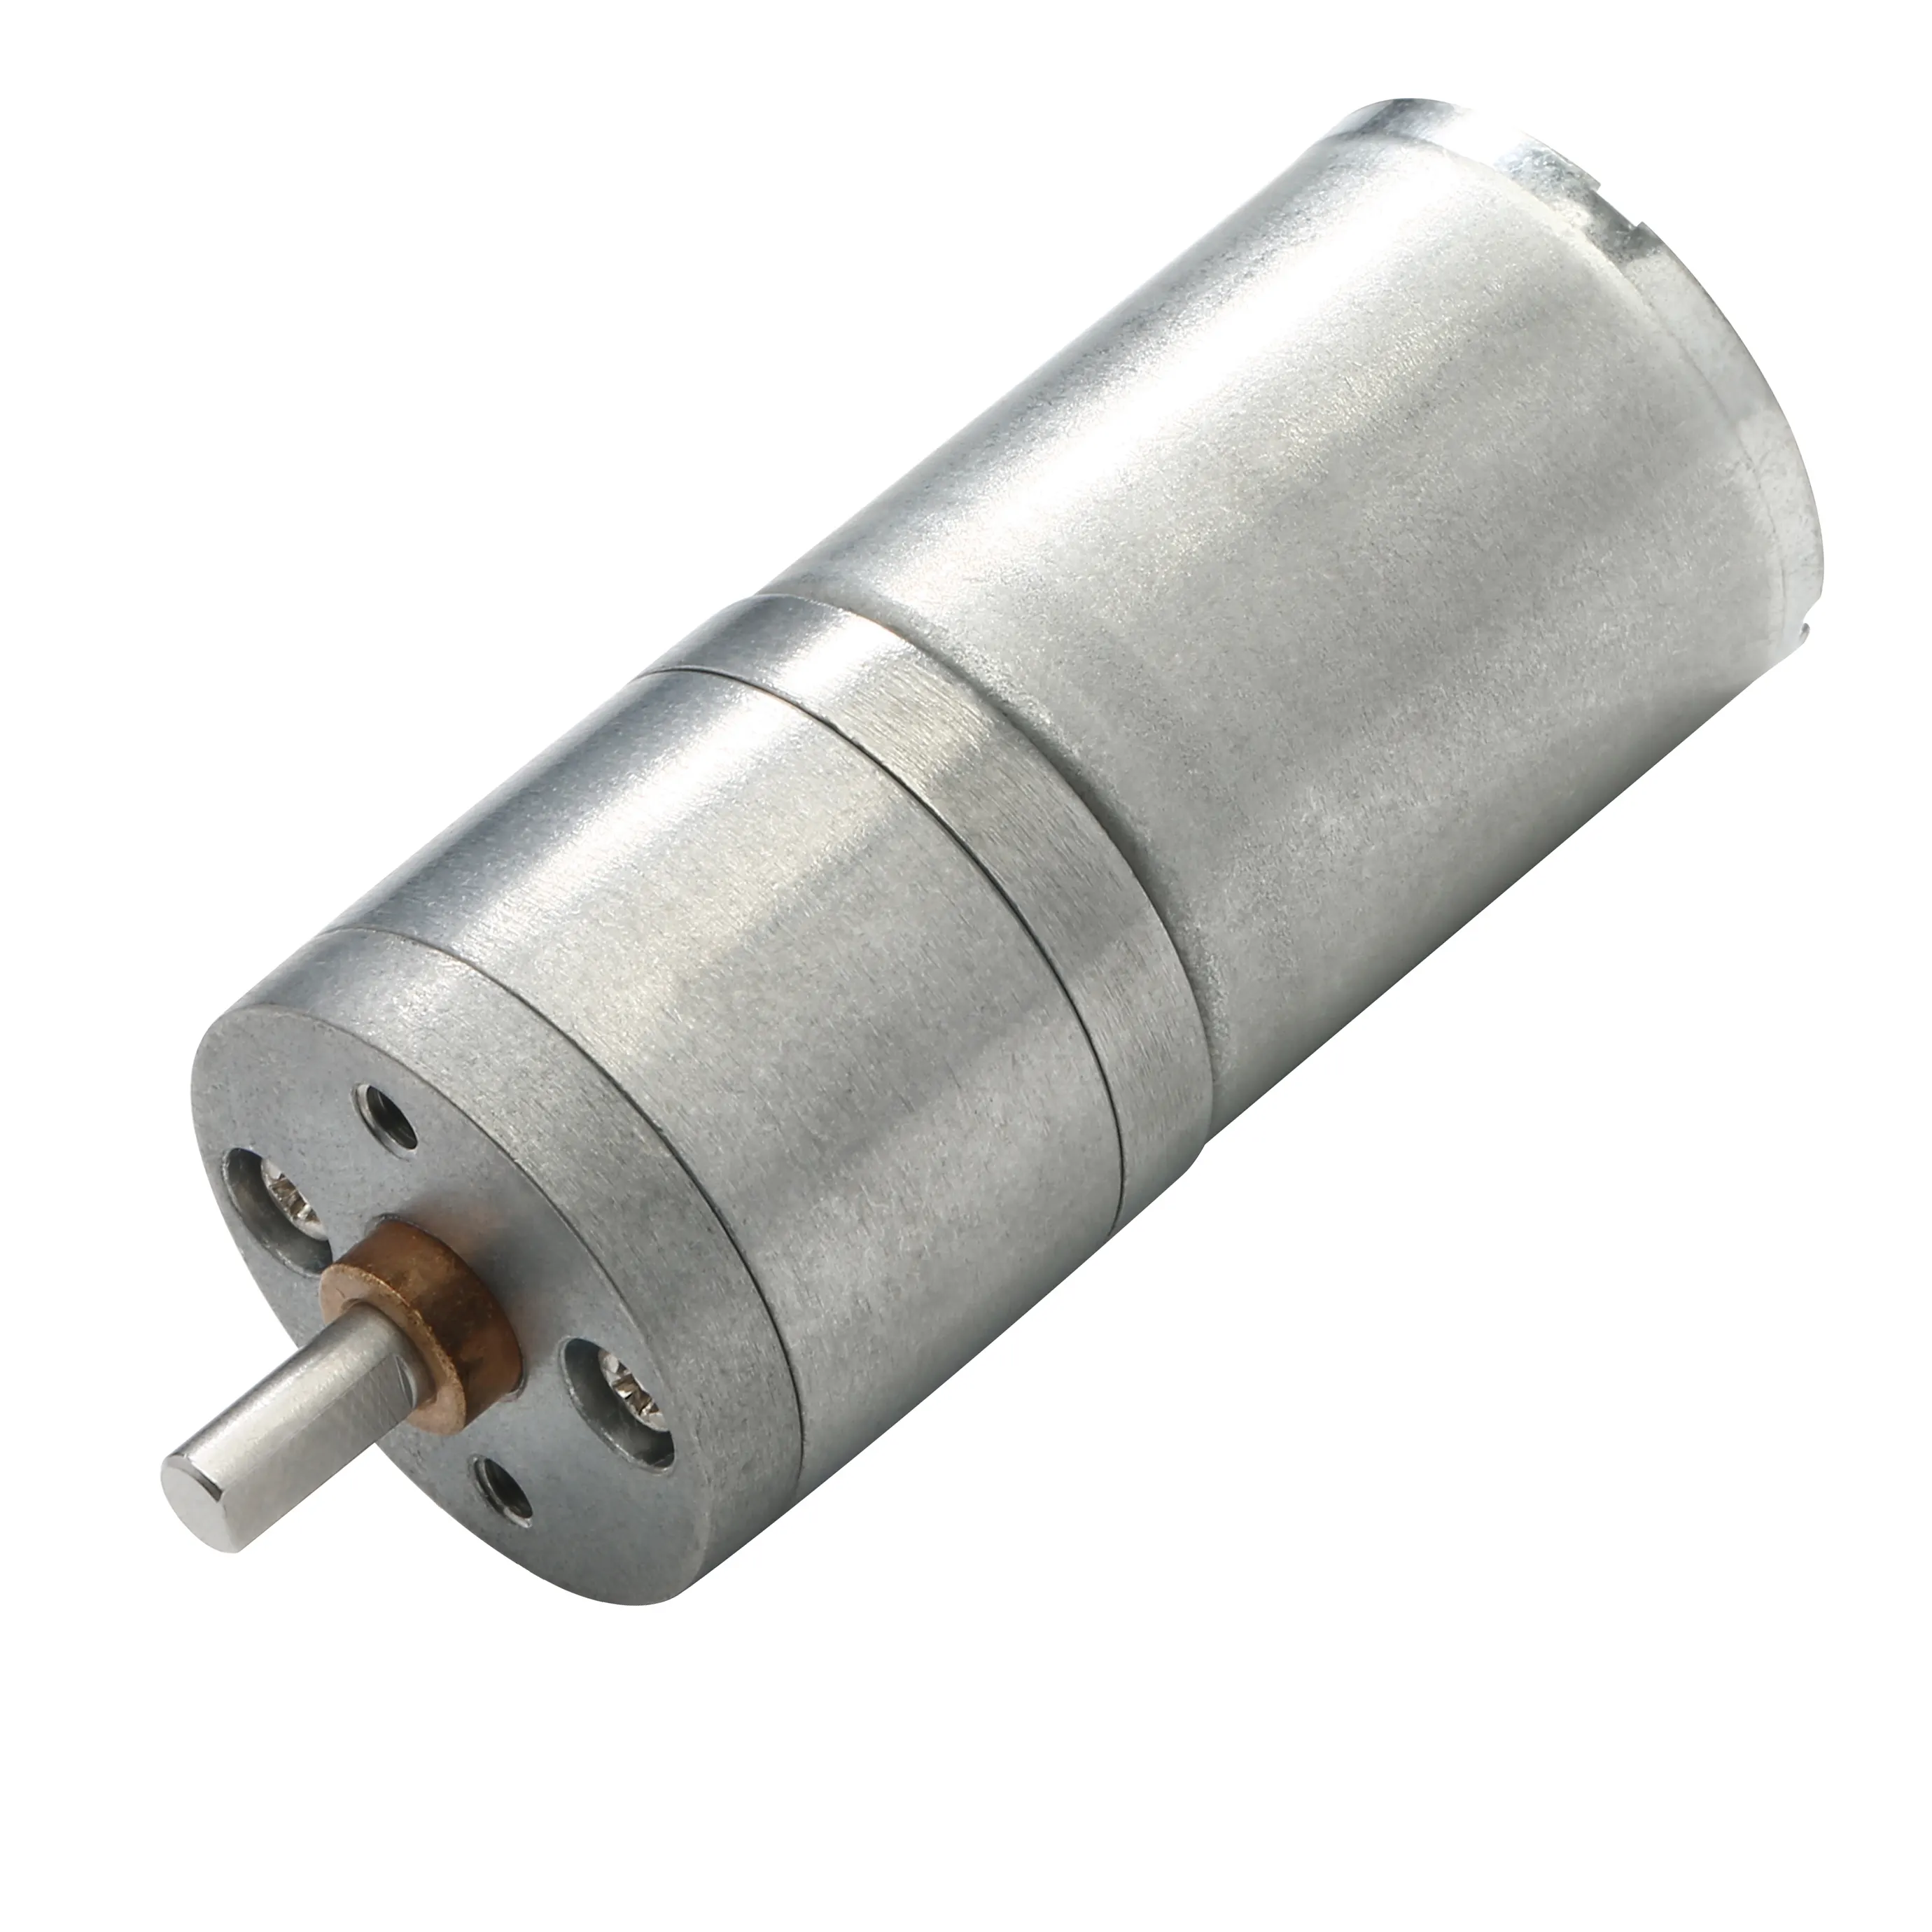 VSDMotor Customized 24V Electric BLDC Motor Low Speed with 25MM Gearbox 2430 Sew Gear Motor